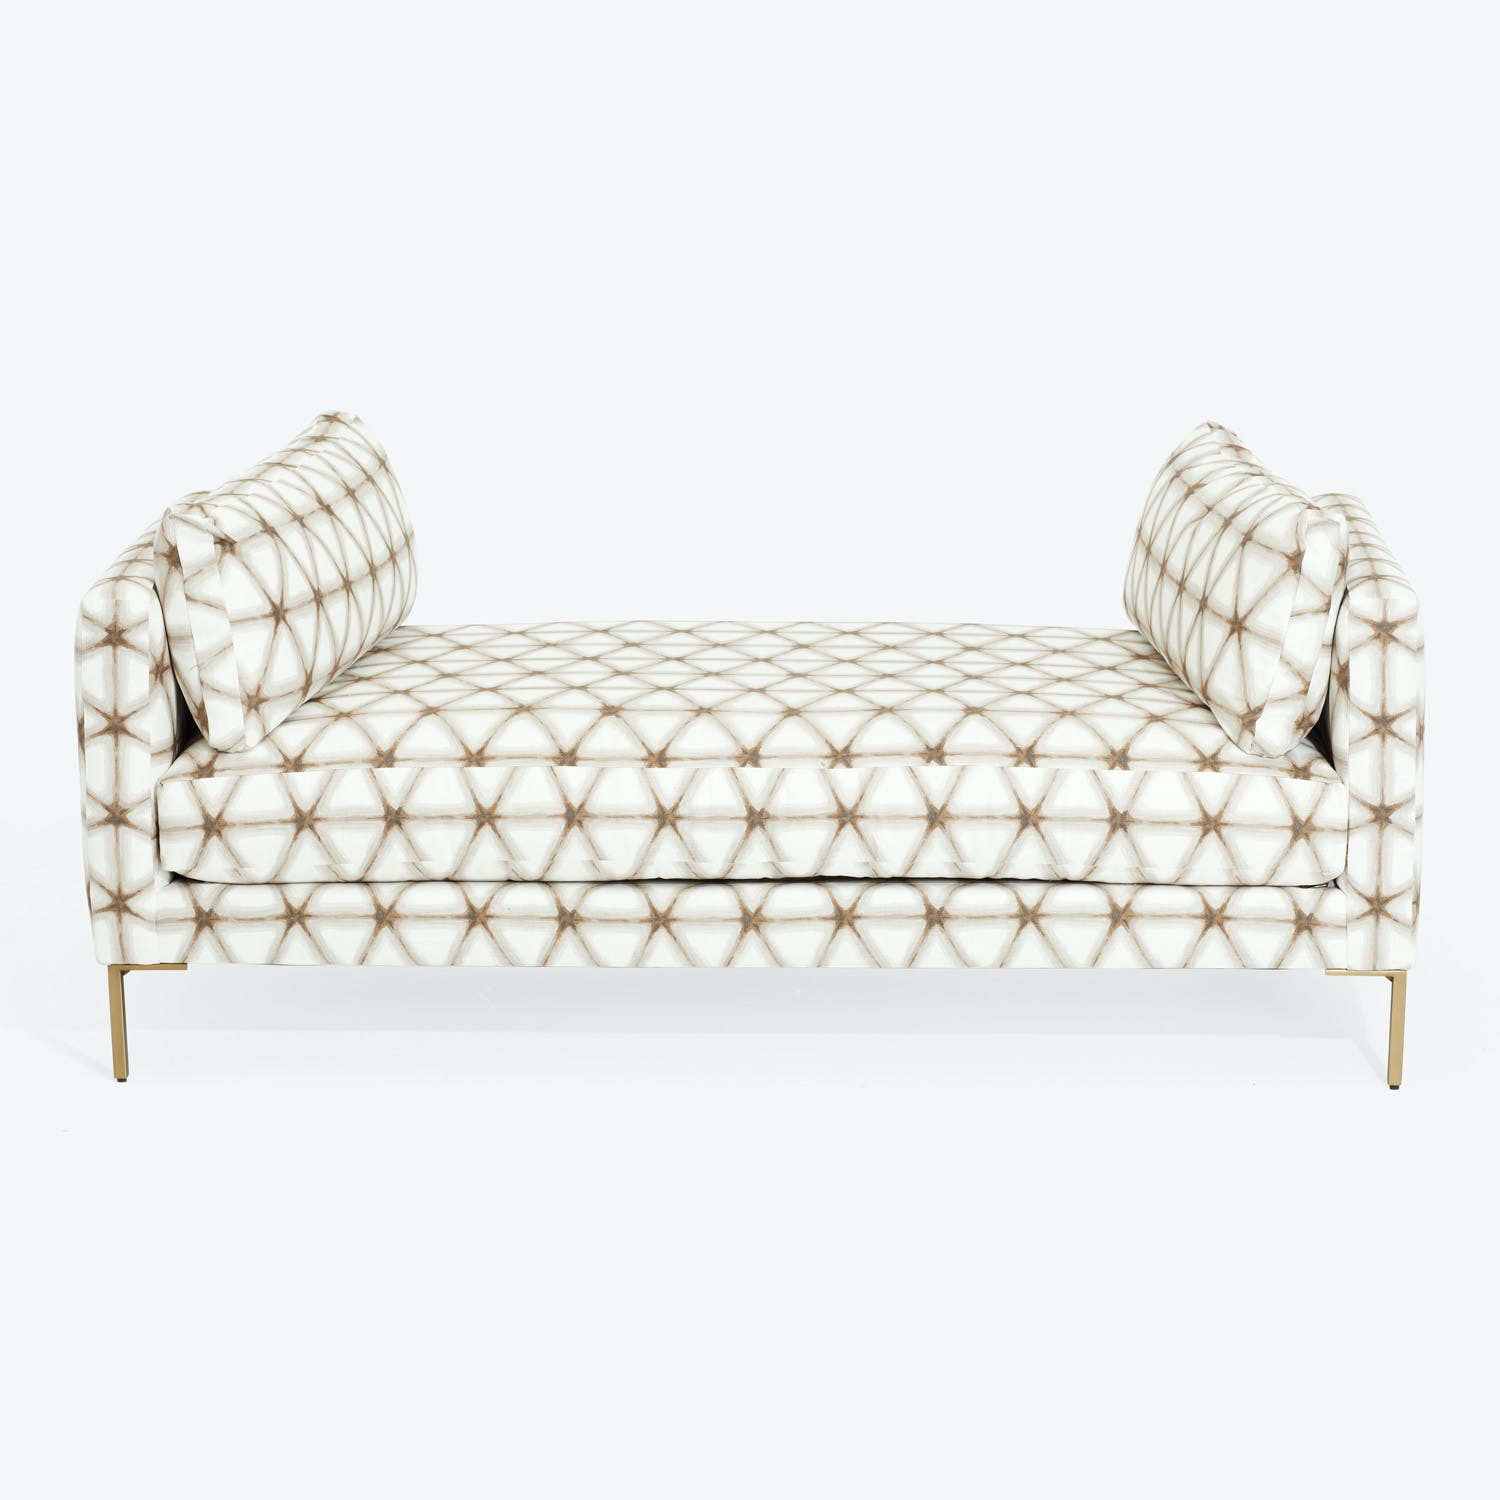 Elegant and refined daybed with geometric pattern upholstery and tufted design